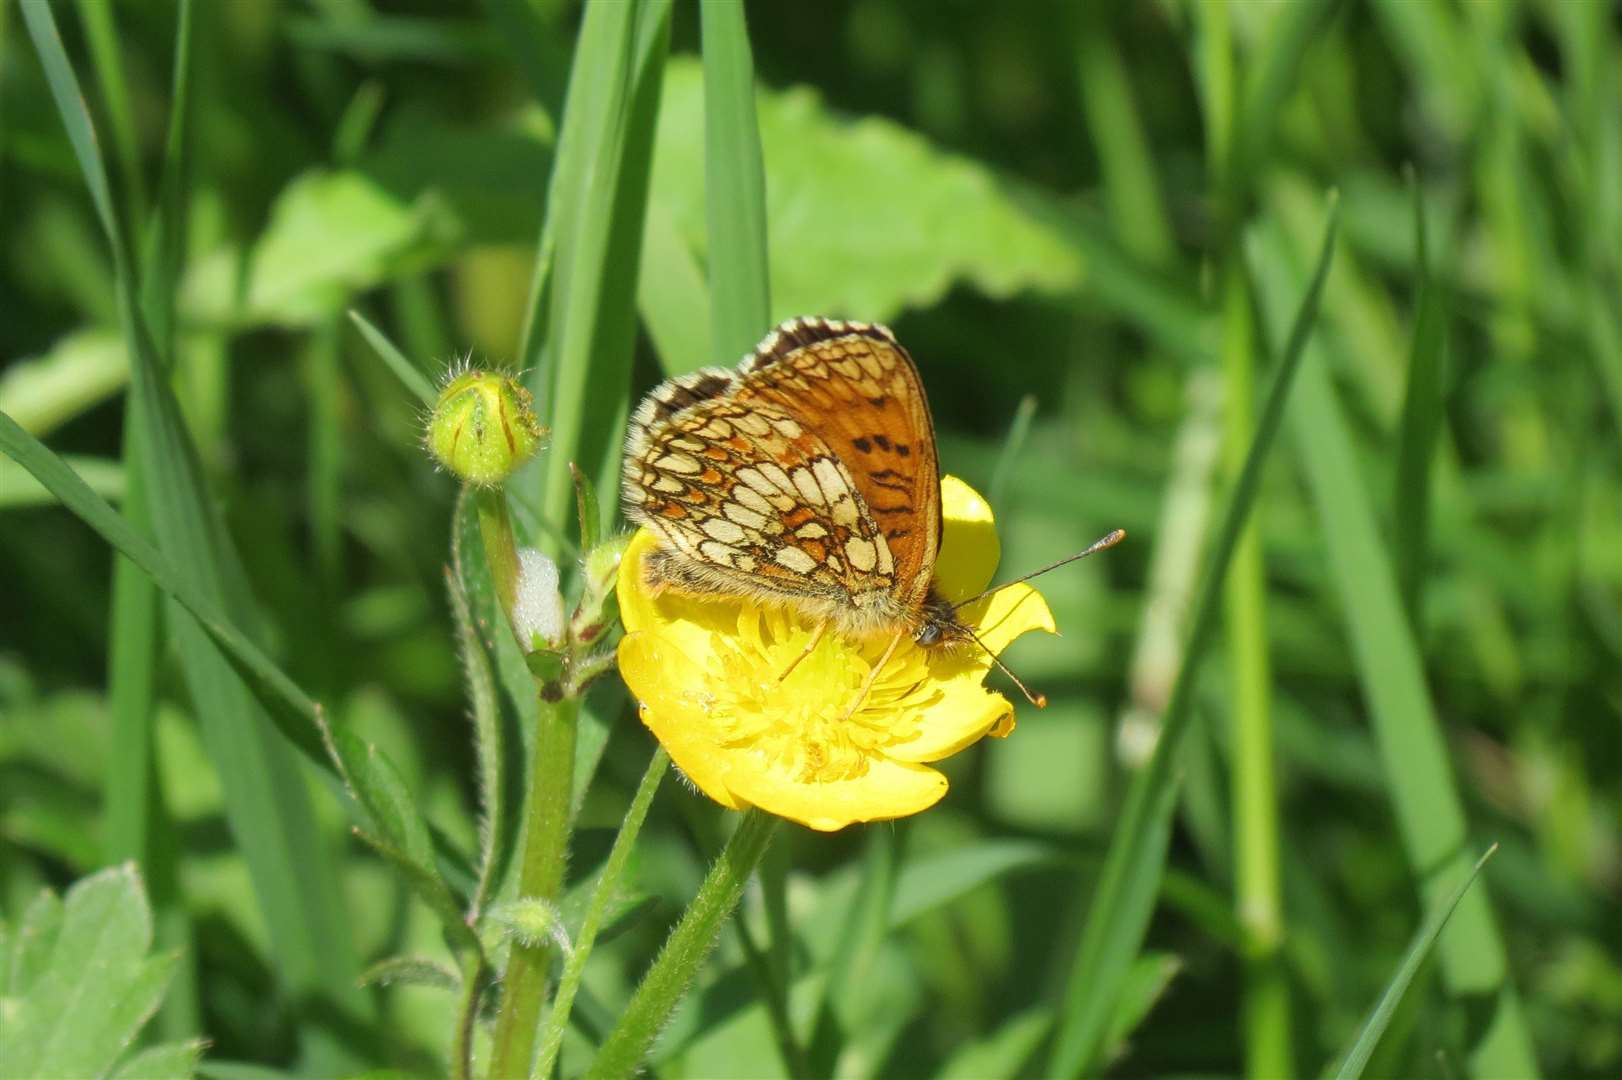 The Heath Fritillary is listed as endangered